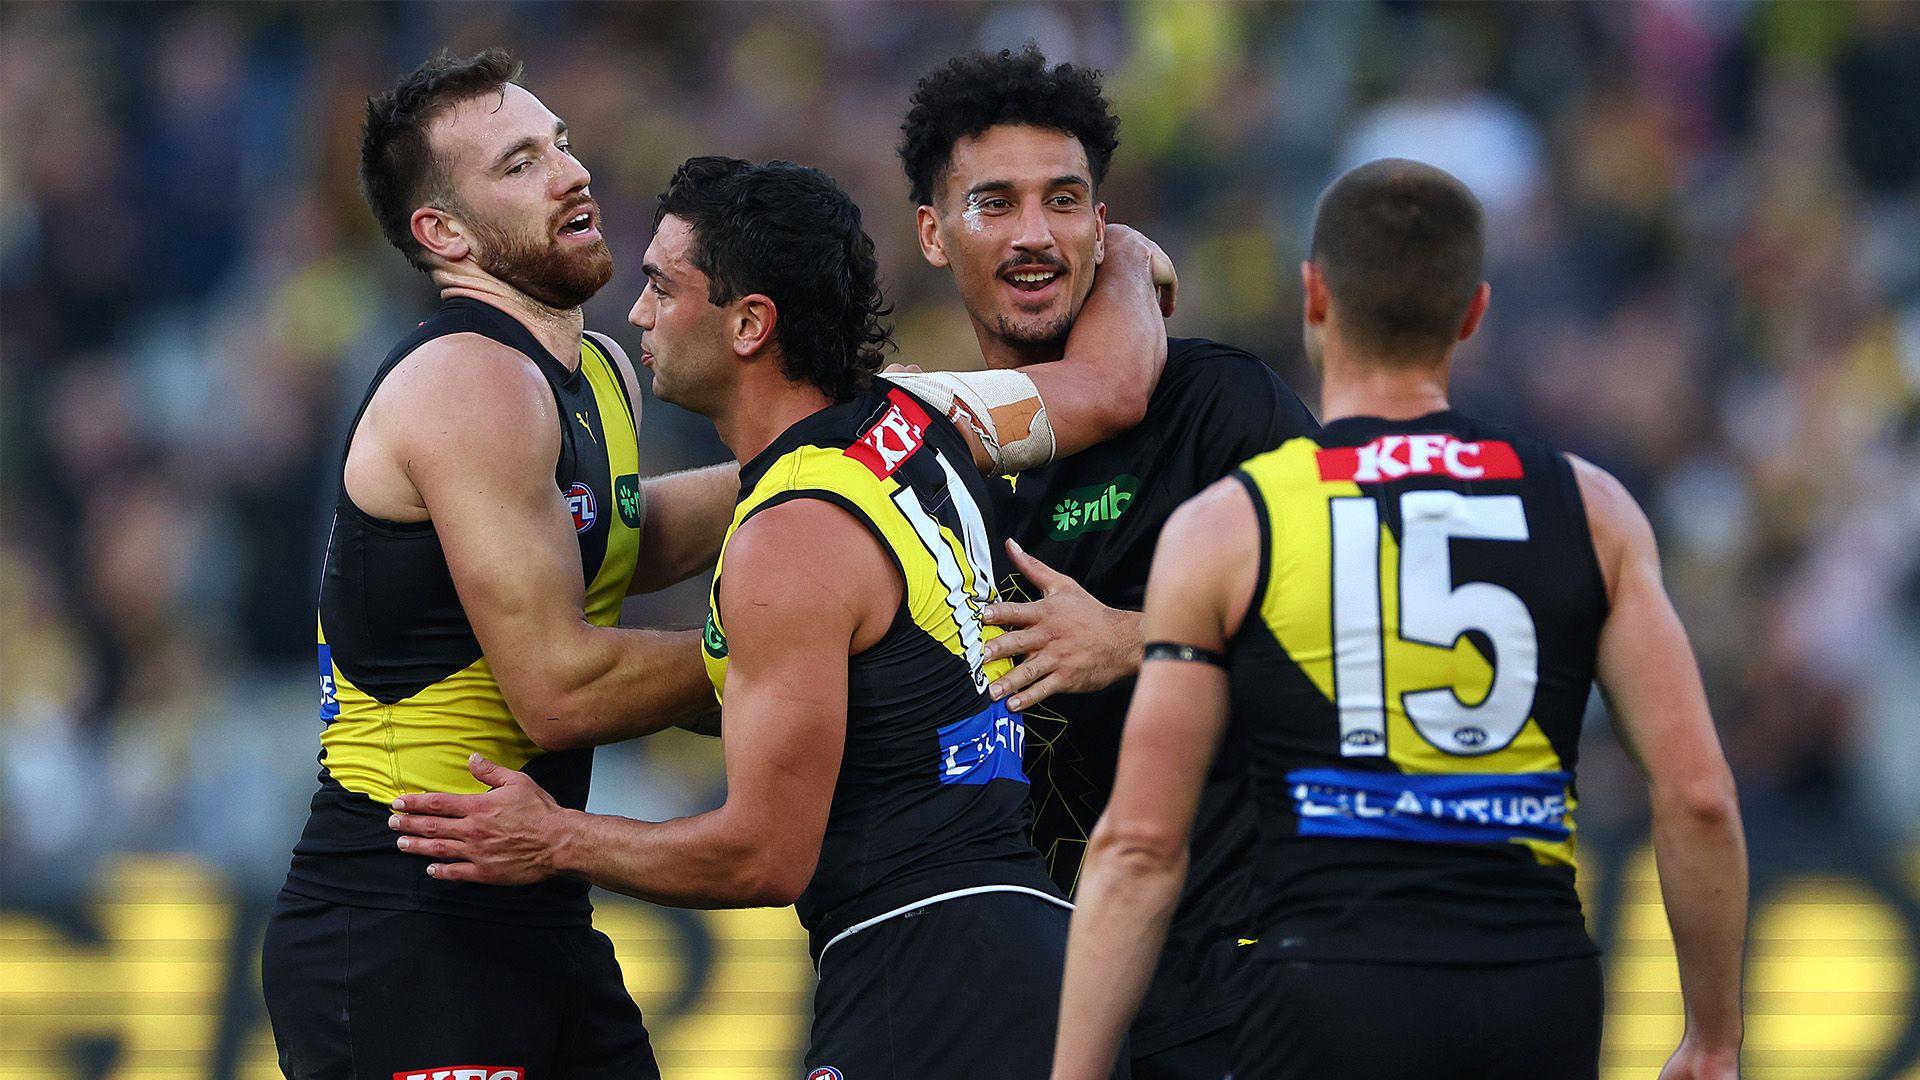 How to watch today’s Richmond Tigers vs Melbourne Demons AFL match: Livestream, TV channel, and start time | Goal.com Australia